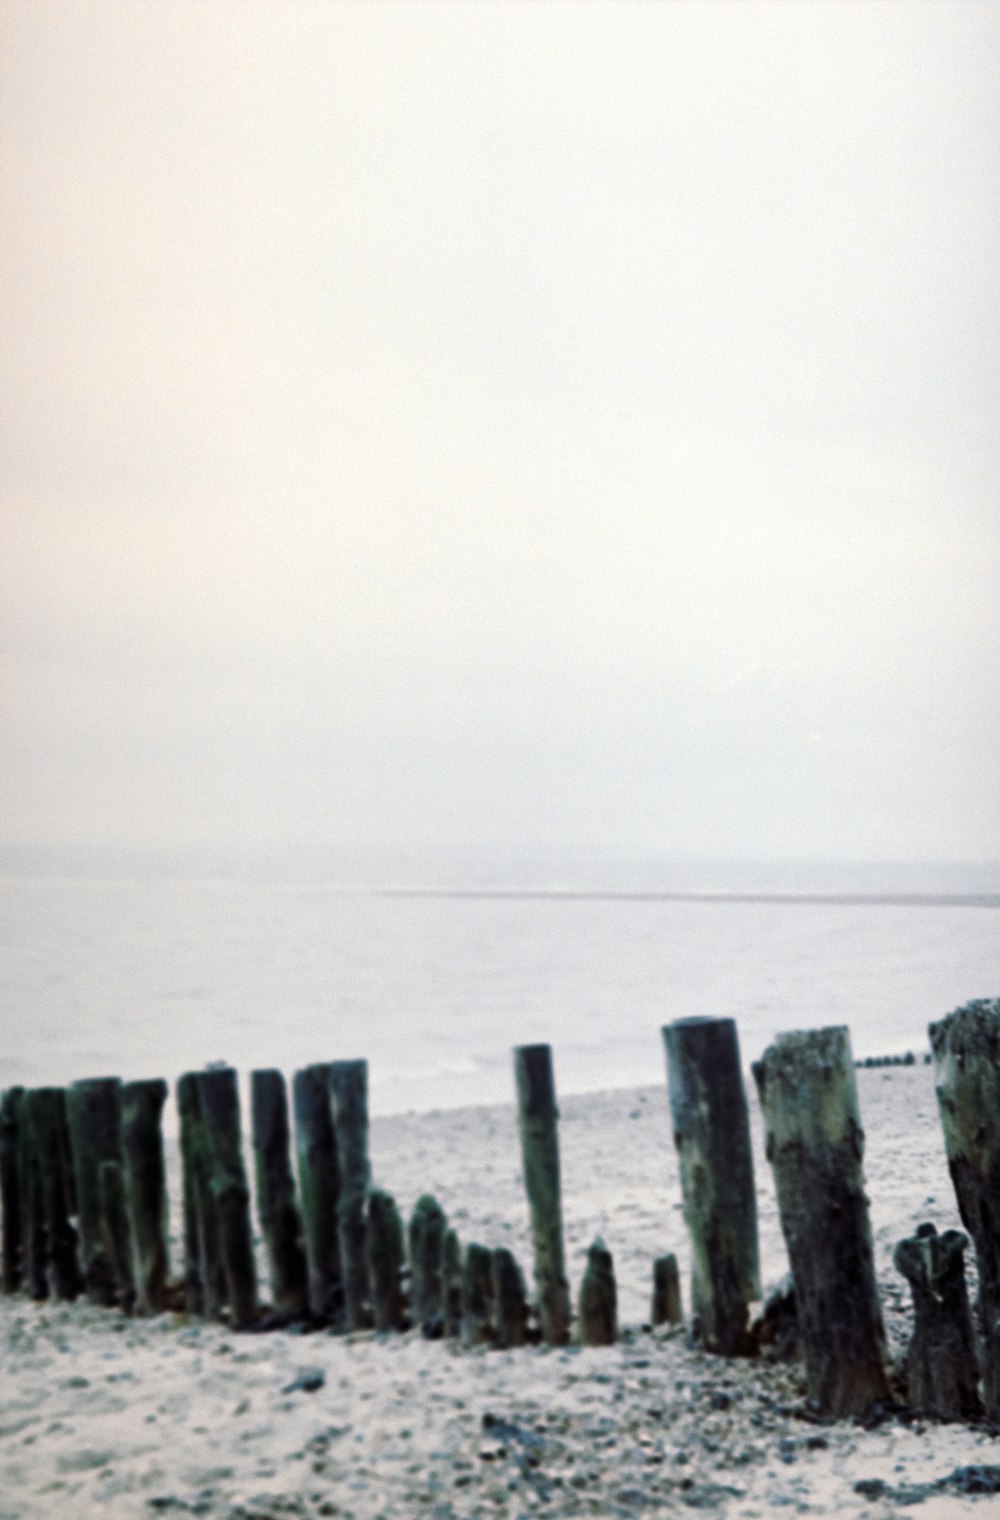 a lone bird sitting on a wooden post on the beach